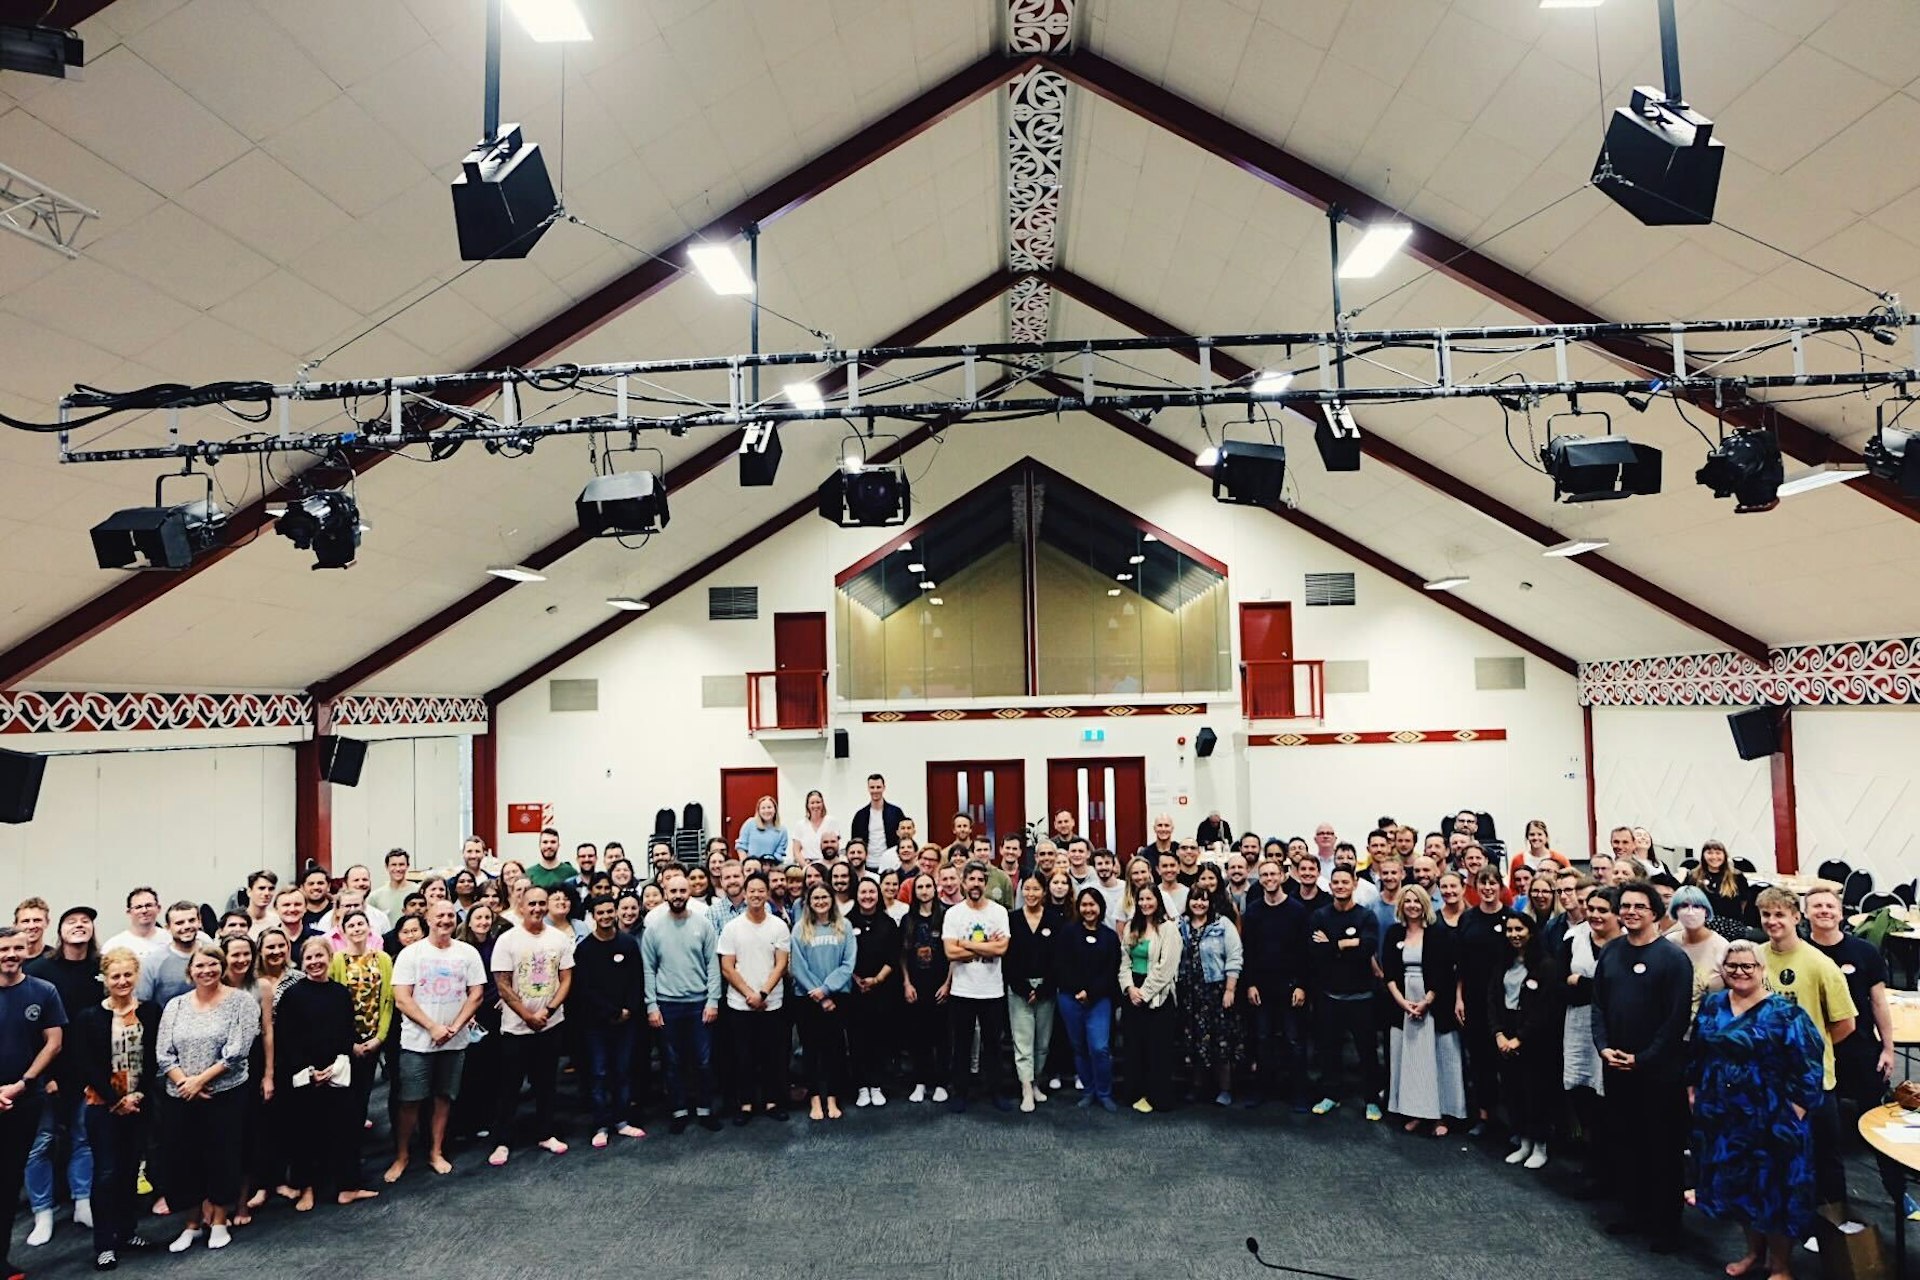 A picture of the full Sharesies team at Pipitea Marae in Wellington New Zealand. 